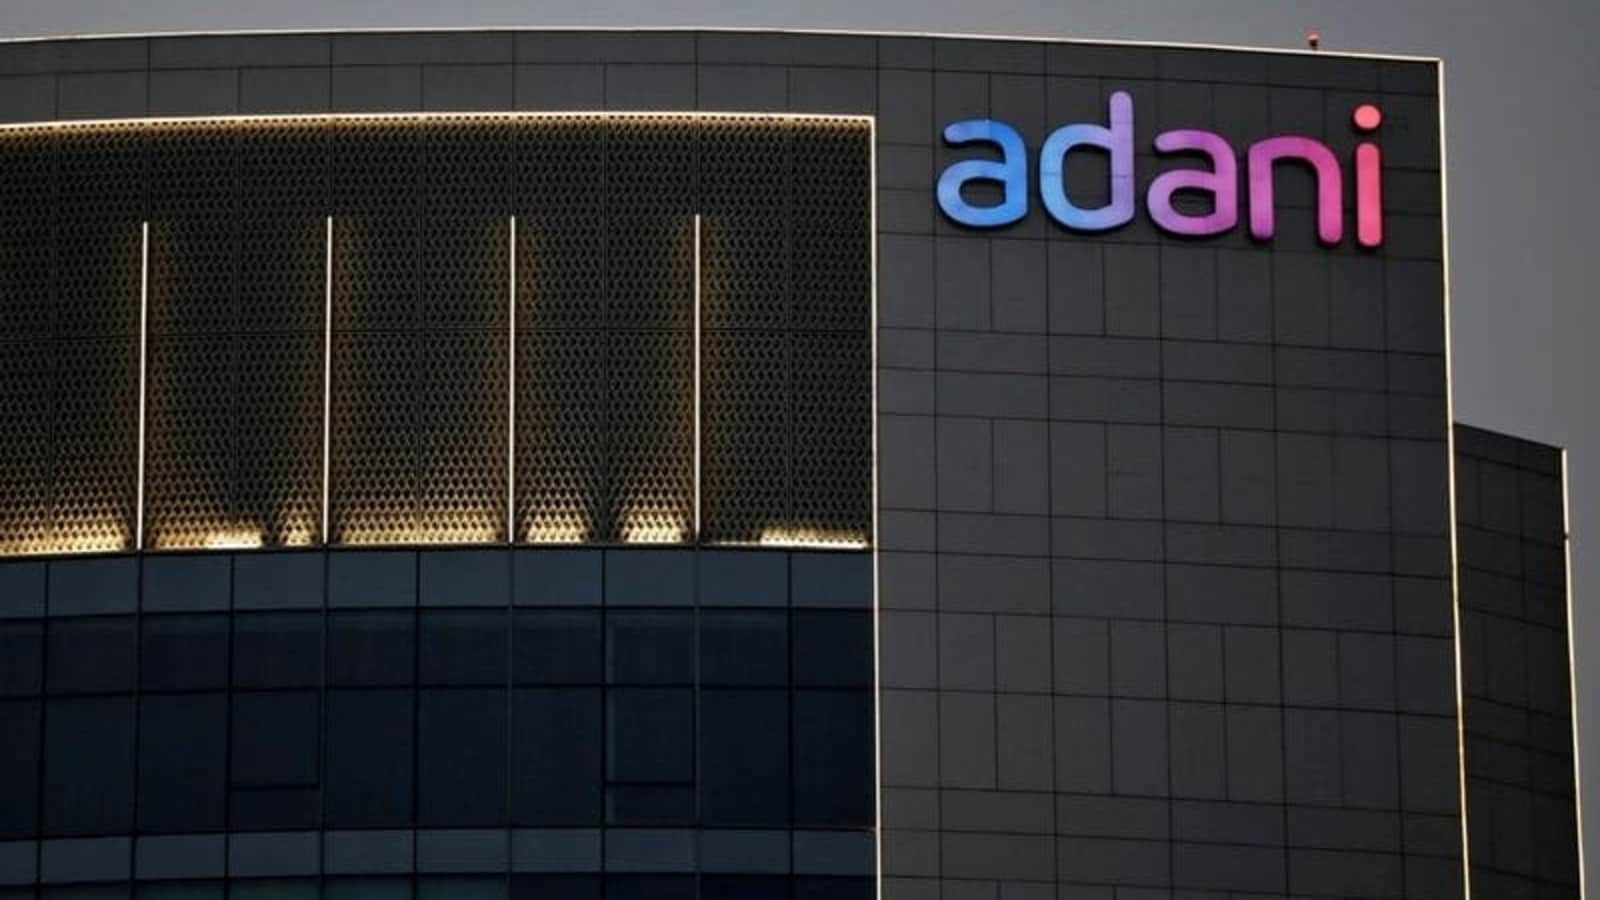 Hindi News: Adani Wilmar IPO: Subscription details, GMP signals and other things